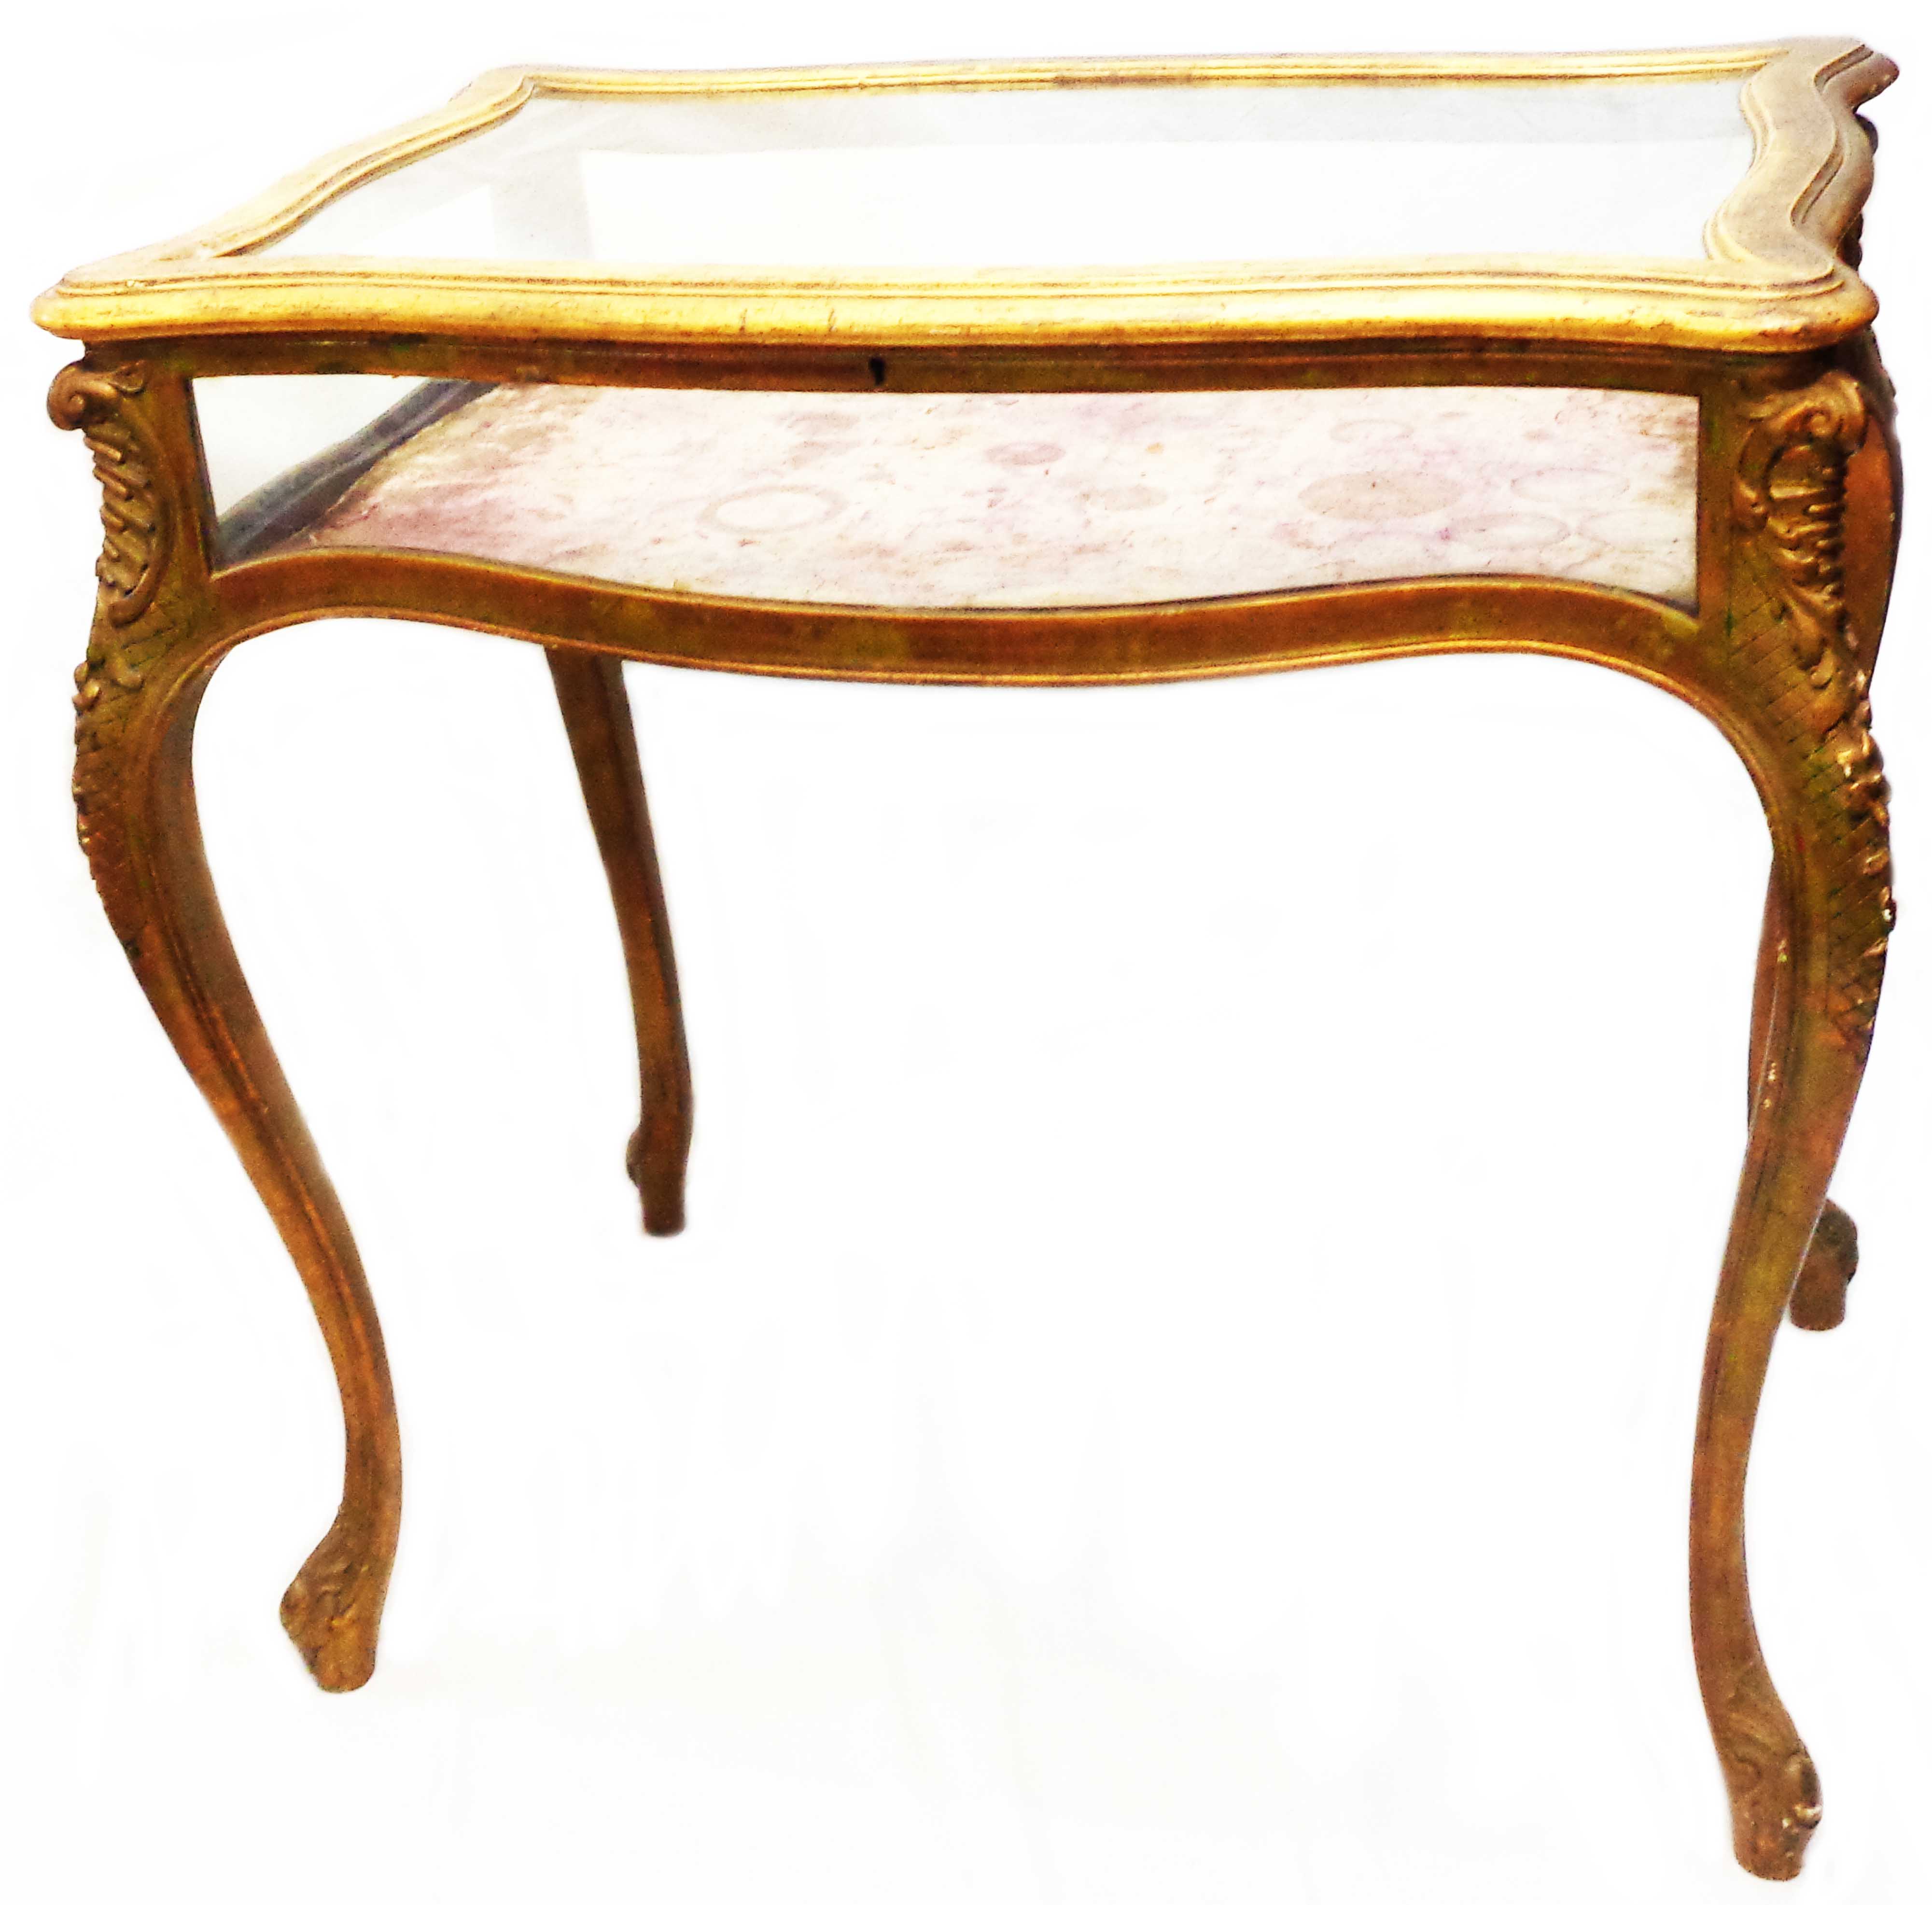 A 79cm late 19th Century giltwood table vitrine of serpentine form with all round glazing and lift-